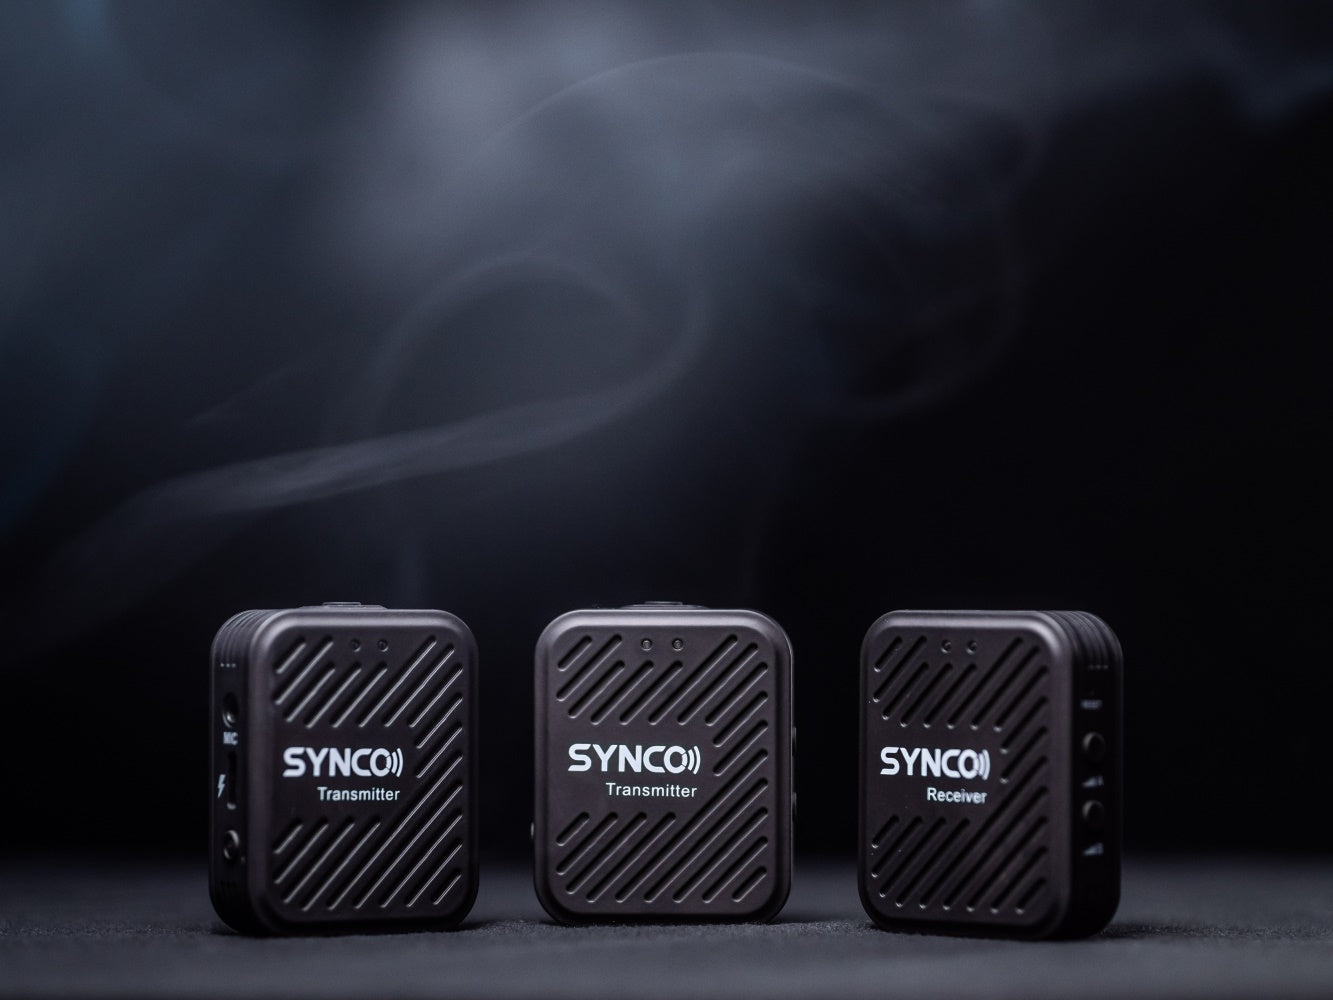 SYNCO G1(A2) video recording wireless microphone is made up of a receiver and two transmitters.